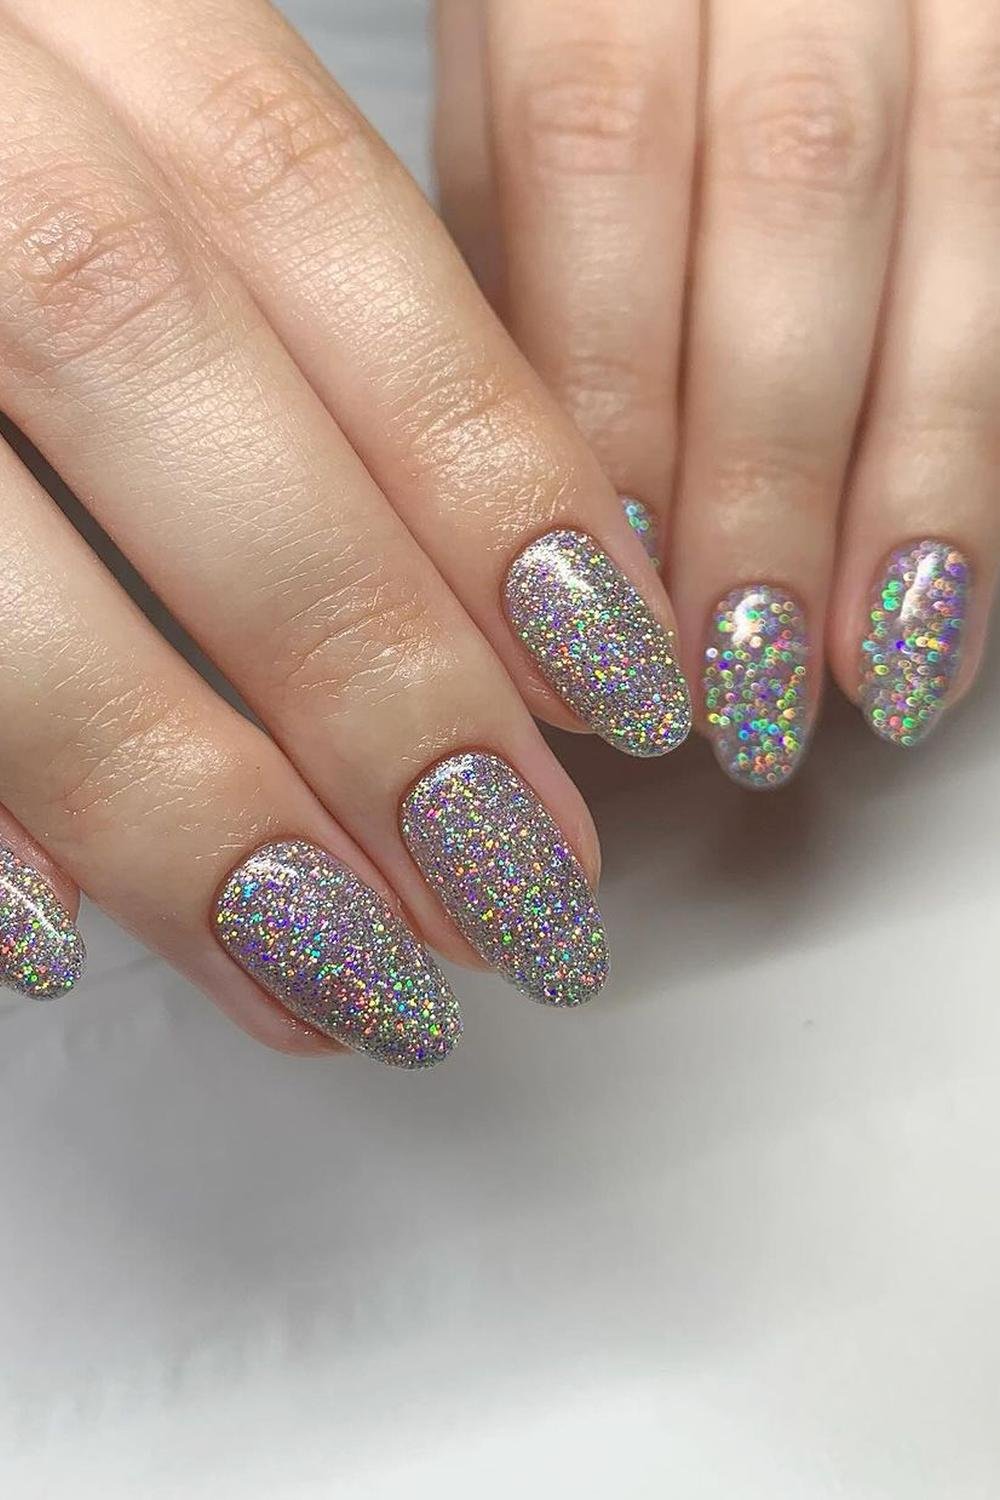 23 - Picture of Silver Glitter Nails